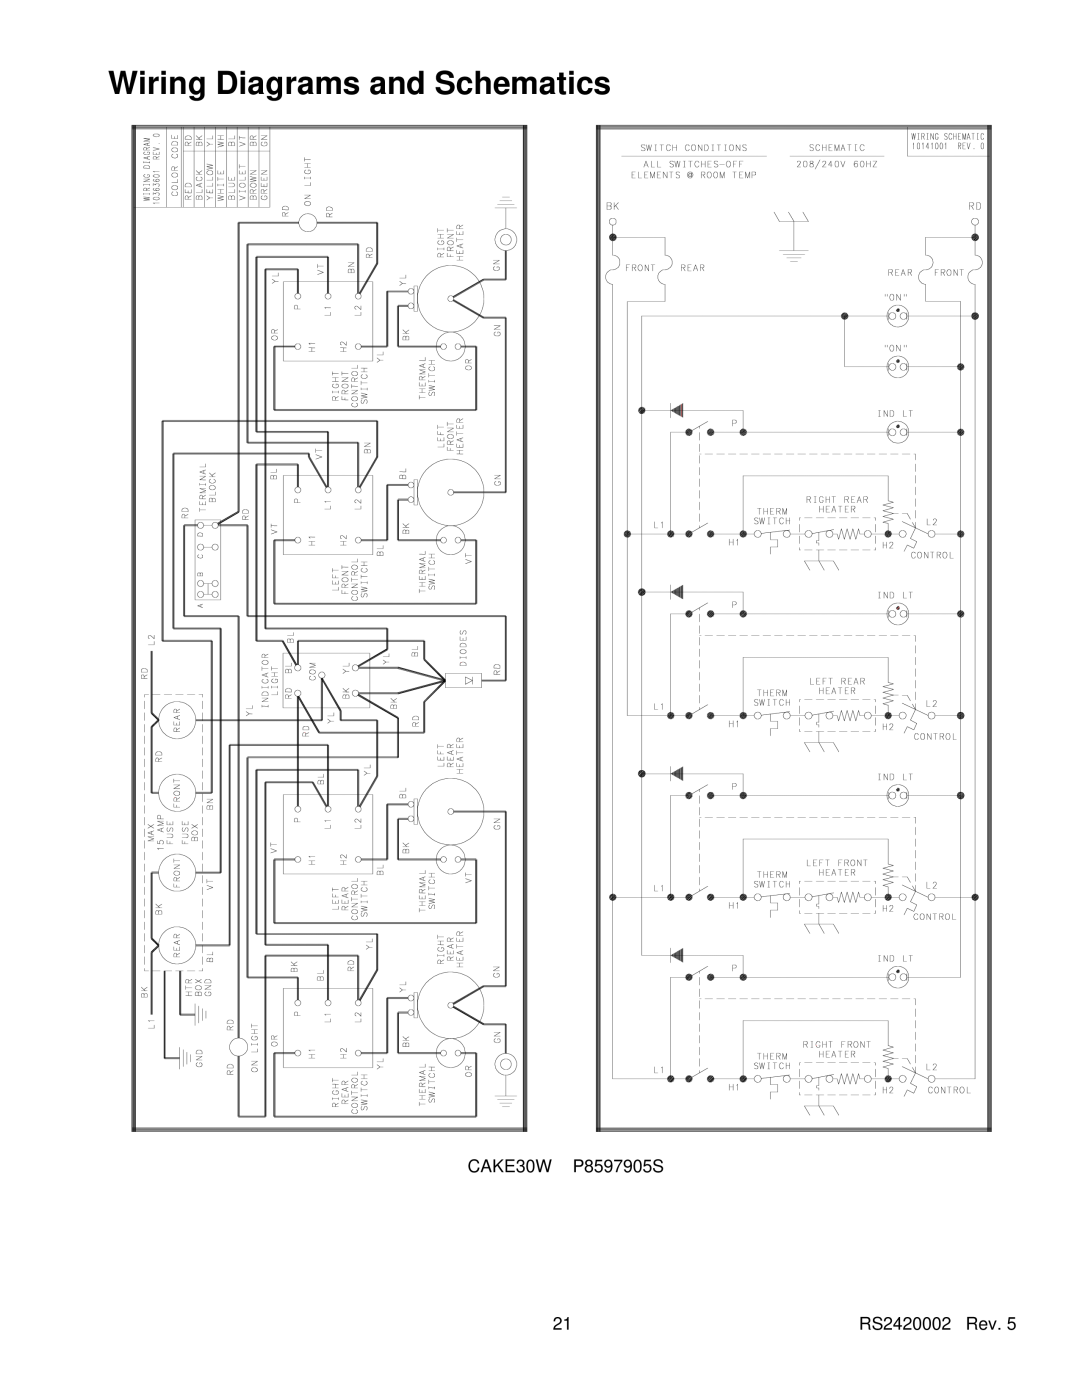 Amana AK2H30, AK2H36E2, AK2HW2, AK2T30/36E1/W1 service manual Wiring Diagrams and Schematics, CAKE30W, P8597905S, RS2420002 